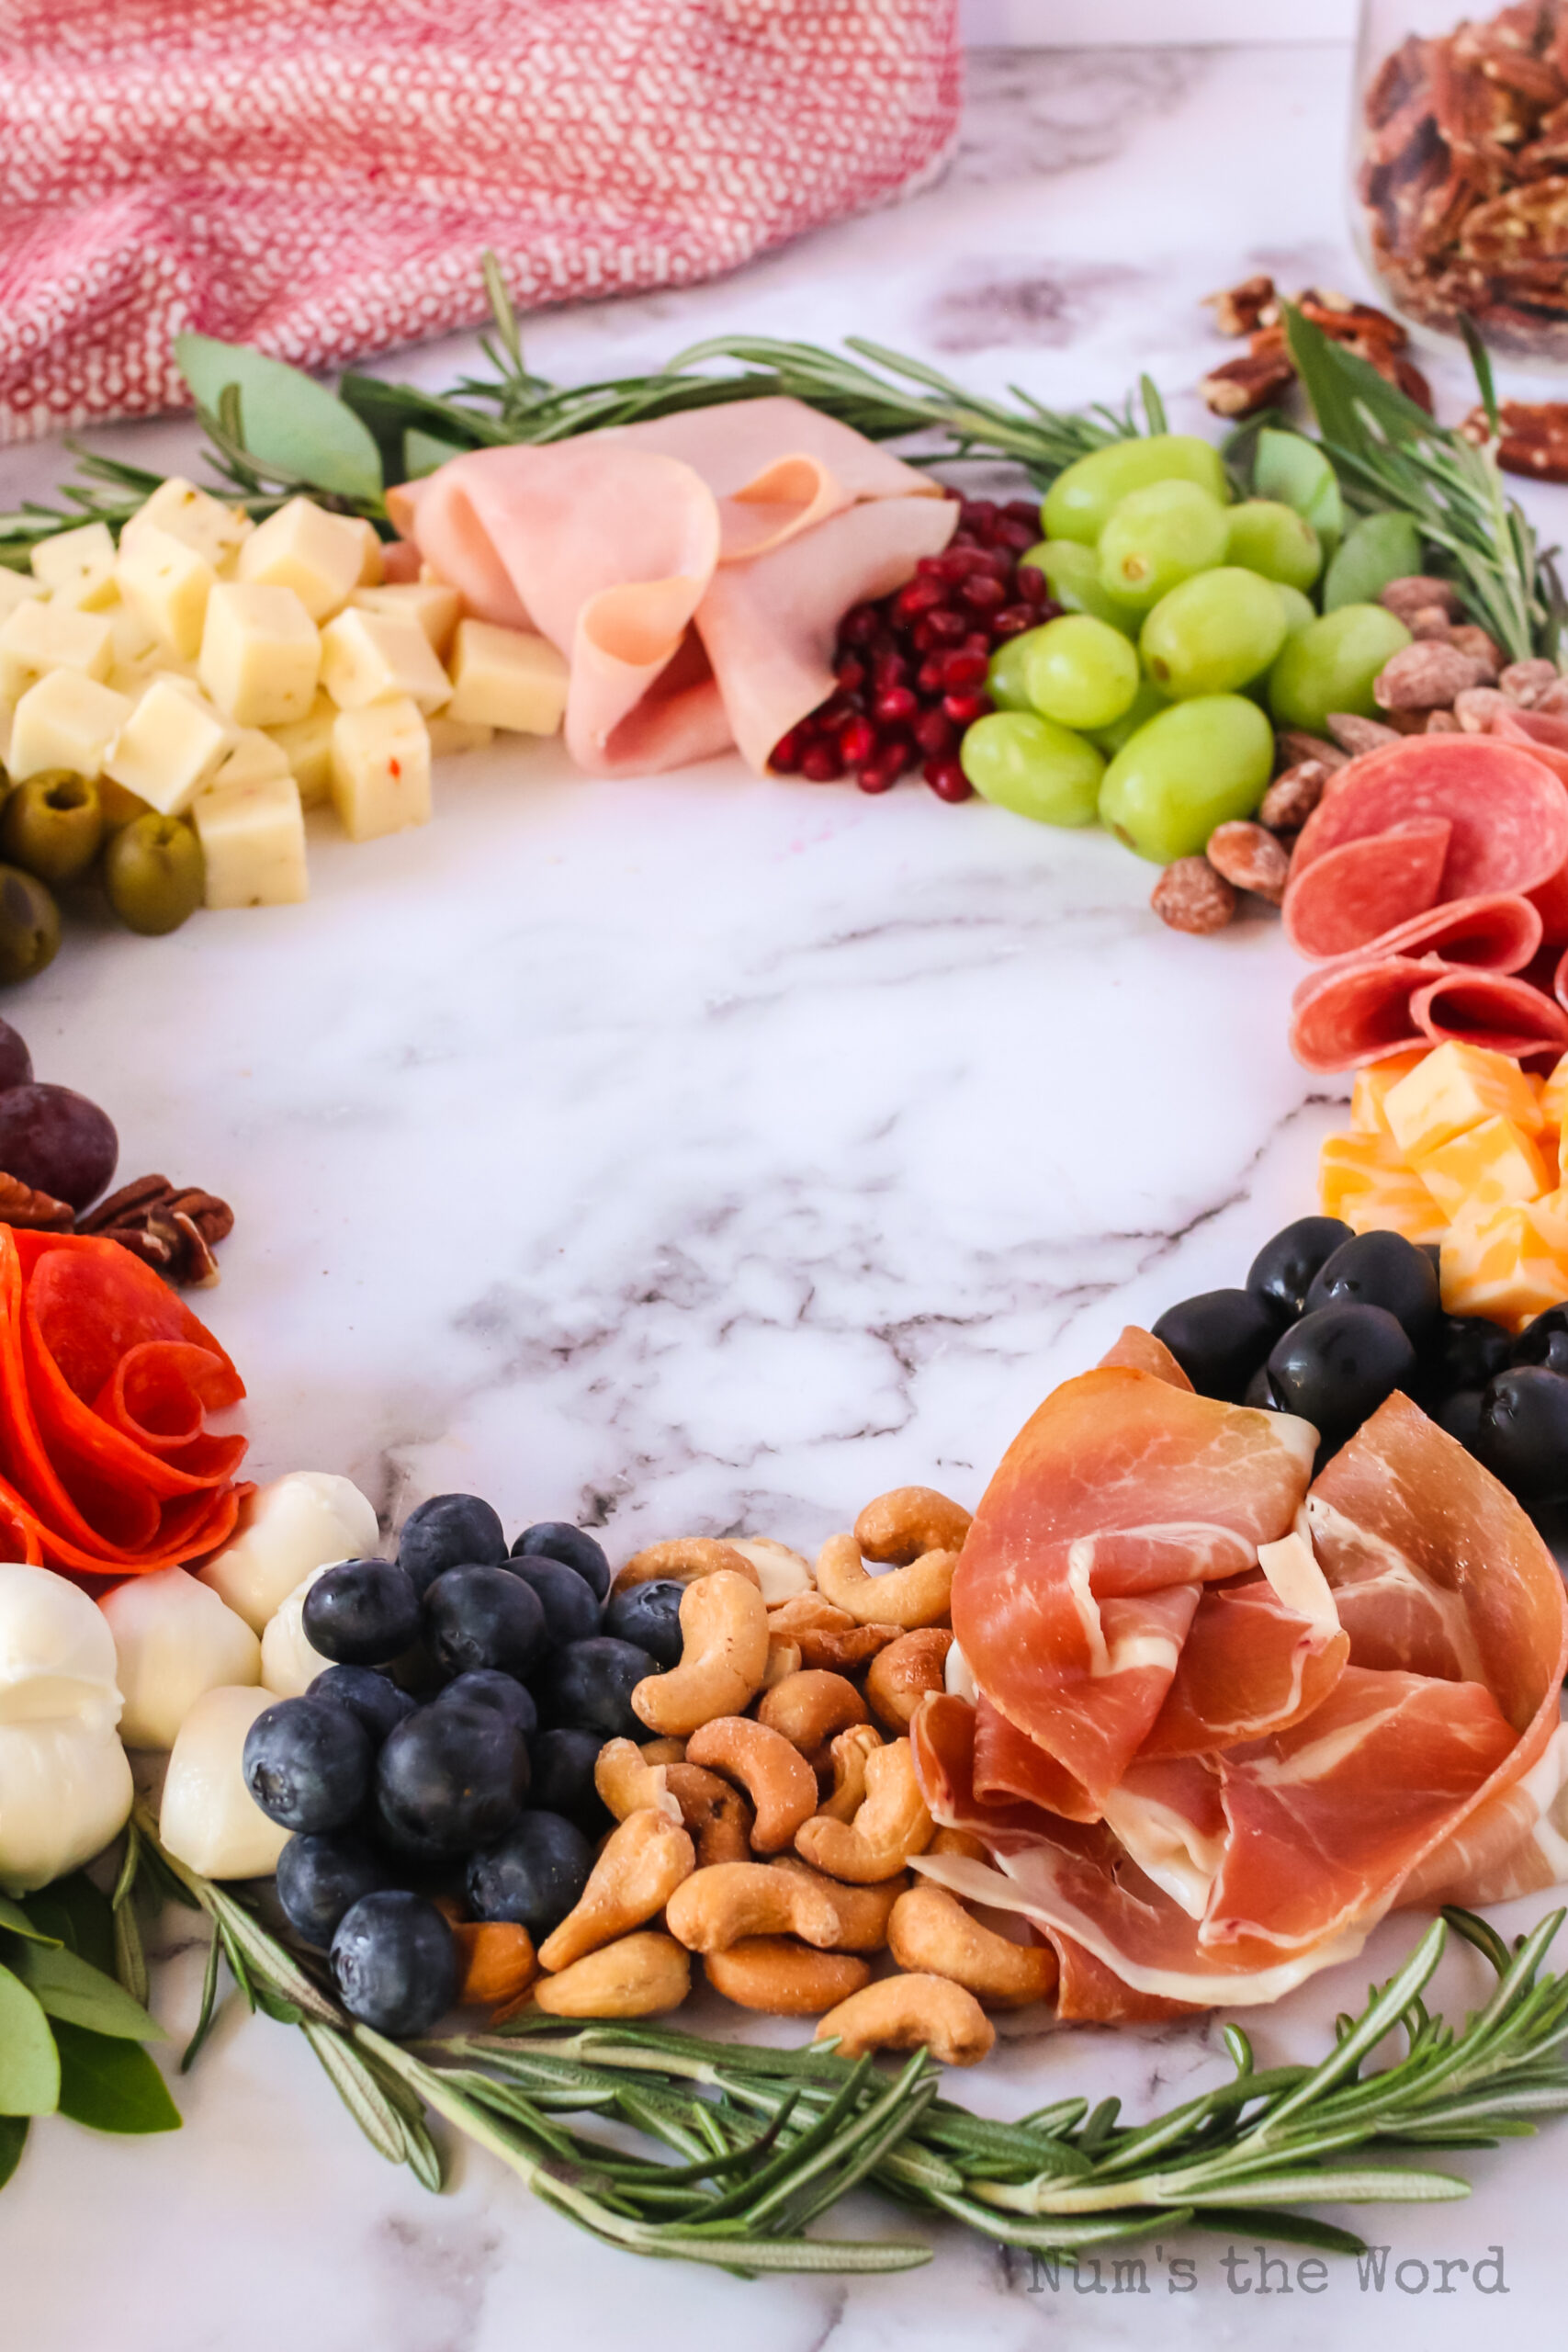 zoomed out image of charcuterie board on a table, side view